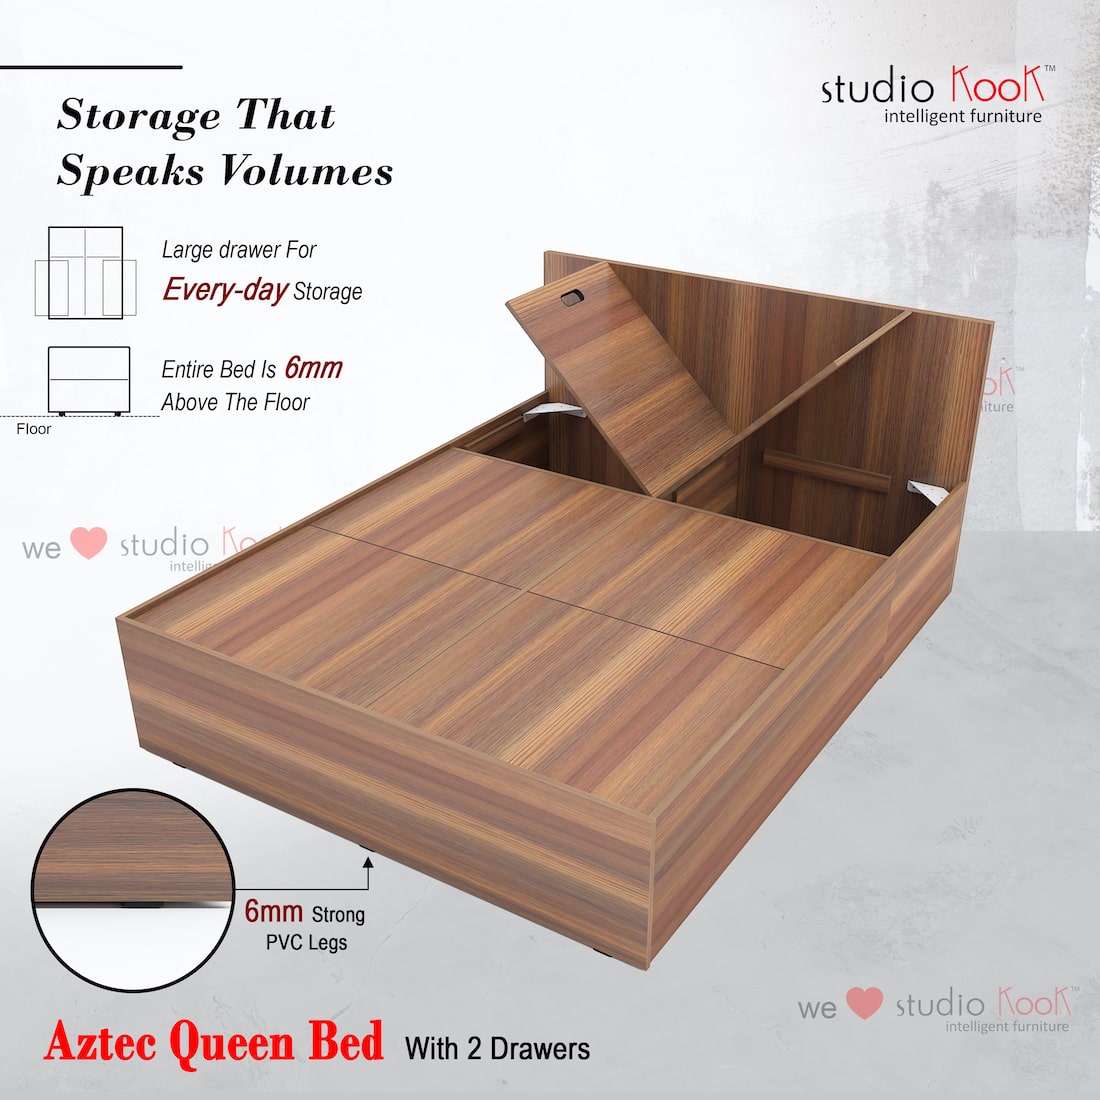 Aztec Queen Bed with 2 Drawers